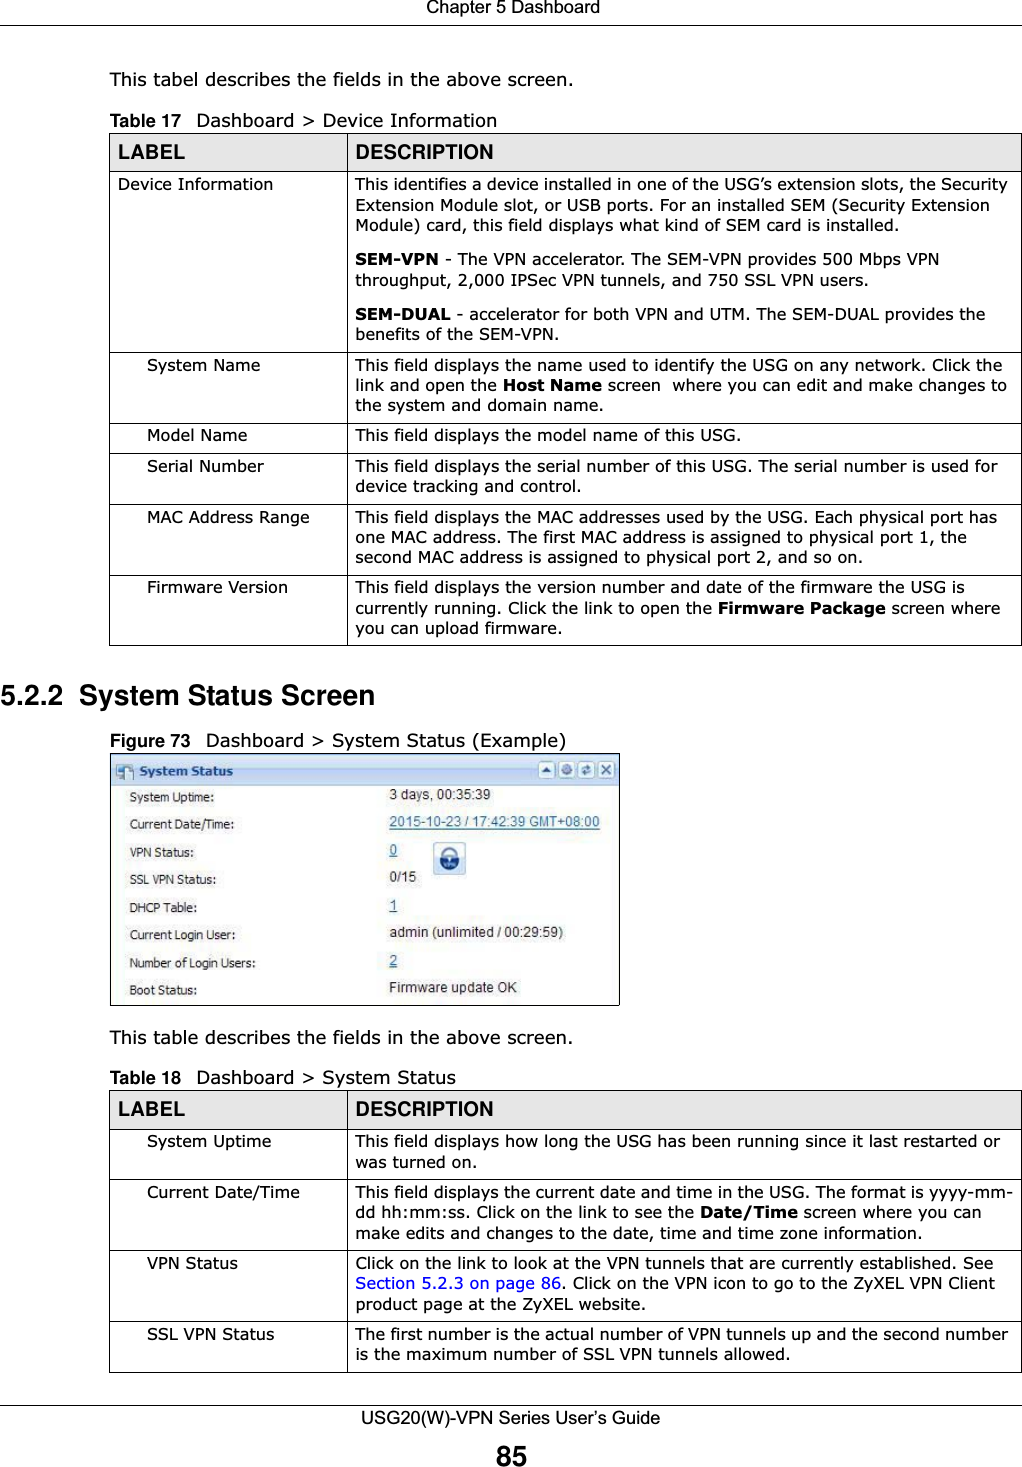  Chapter 5 DashboardUSG20(W)-VPN Series User’s Guide85This tabel describes the fields in the above screen. 5.2.2  System Status ScreenFigure 73   Dashboard &gt; System Status (Example) This table describes the fields in the above screen.Table 17   Dashboard &gt; Device InformationLABEL DESCRIPTIONDevice Information This identifies a device installed in one of the USG’s extension slots, the Security Extension Module slot, or USB ports. For an installed SEM (Security Extension Module) card, this field displays what kind of SEM card is installed. SEM-VPN - The VPN accelerator. The SEM-VPN provides 500 Mbps VPN throughput, 2,000 IPSec VPN tunnels, and 750 SSL VPN users.SEM-DUAL - accelerator for both VPN and UTM. The SEM-DUAL provides the benefits of the SEM-VPN.System Name This field displays the name used to identify the USG on any network. Click the link and open the Host Name screen  where you can edit and make changes to the system and domain name.Model Name This field displays the model name of this USG.Serial Number This field displays the serial number of this USG. The serial number is used for device tracking and control.MAC Address Range This field displays the MAC addresses used by the USG. Each physical port has one MAC address. The first MAC address is assigned to physical port 1, the second MAC address is assigned to physical port 2, and so on.Firmware Version This field displays the version number and date of the firmware the USG is currently running. Click the link to open the Firmware Package screen where you can upload firmware. Table 18   Dashboard &gt; System StatusLABEL DESCRIPTIONSystem Uptime This field displays how long the USG has been running since it last restarted or was turned on.Current Date/Time This field displays the current date and time in the USG. The format is yyyy-mm-dd hh:mm:ss. Click on the link to see the Date/Time screen where you can make edits and changes to the date, time and time zone information.VPN Status Click on the link to look at the VPN tunnels that are currently established. See Section 5.2.3 on page 86. Click on the VPN icon to go to the ZyXEL VPN Client product page at the ZyXEL website.SSL VPN Status The first number is the actual number of VPN tunnels up and the second number is the maximum number of SSL VPN tunnels allowed.